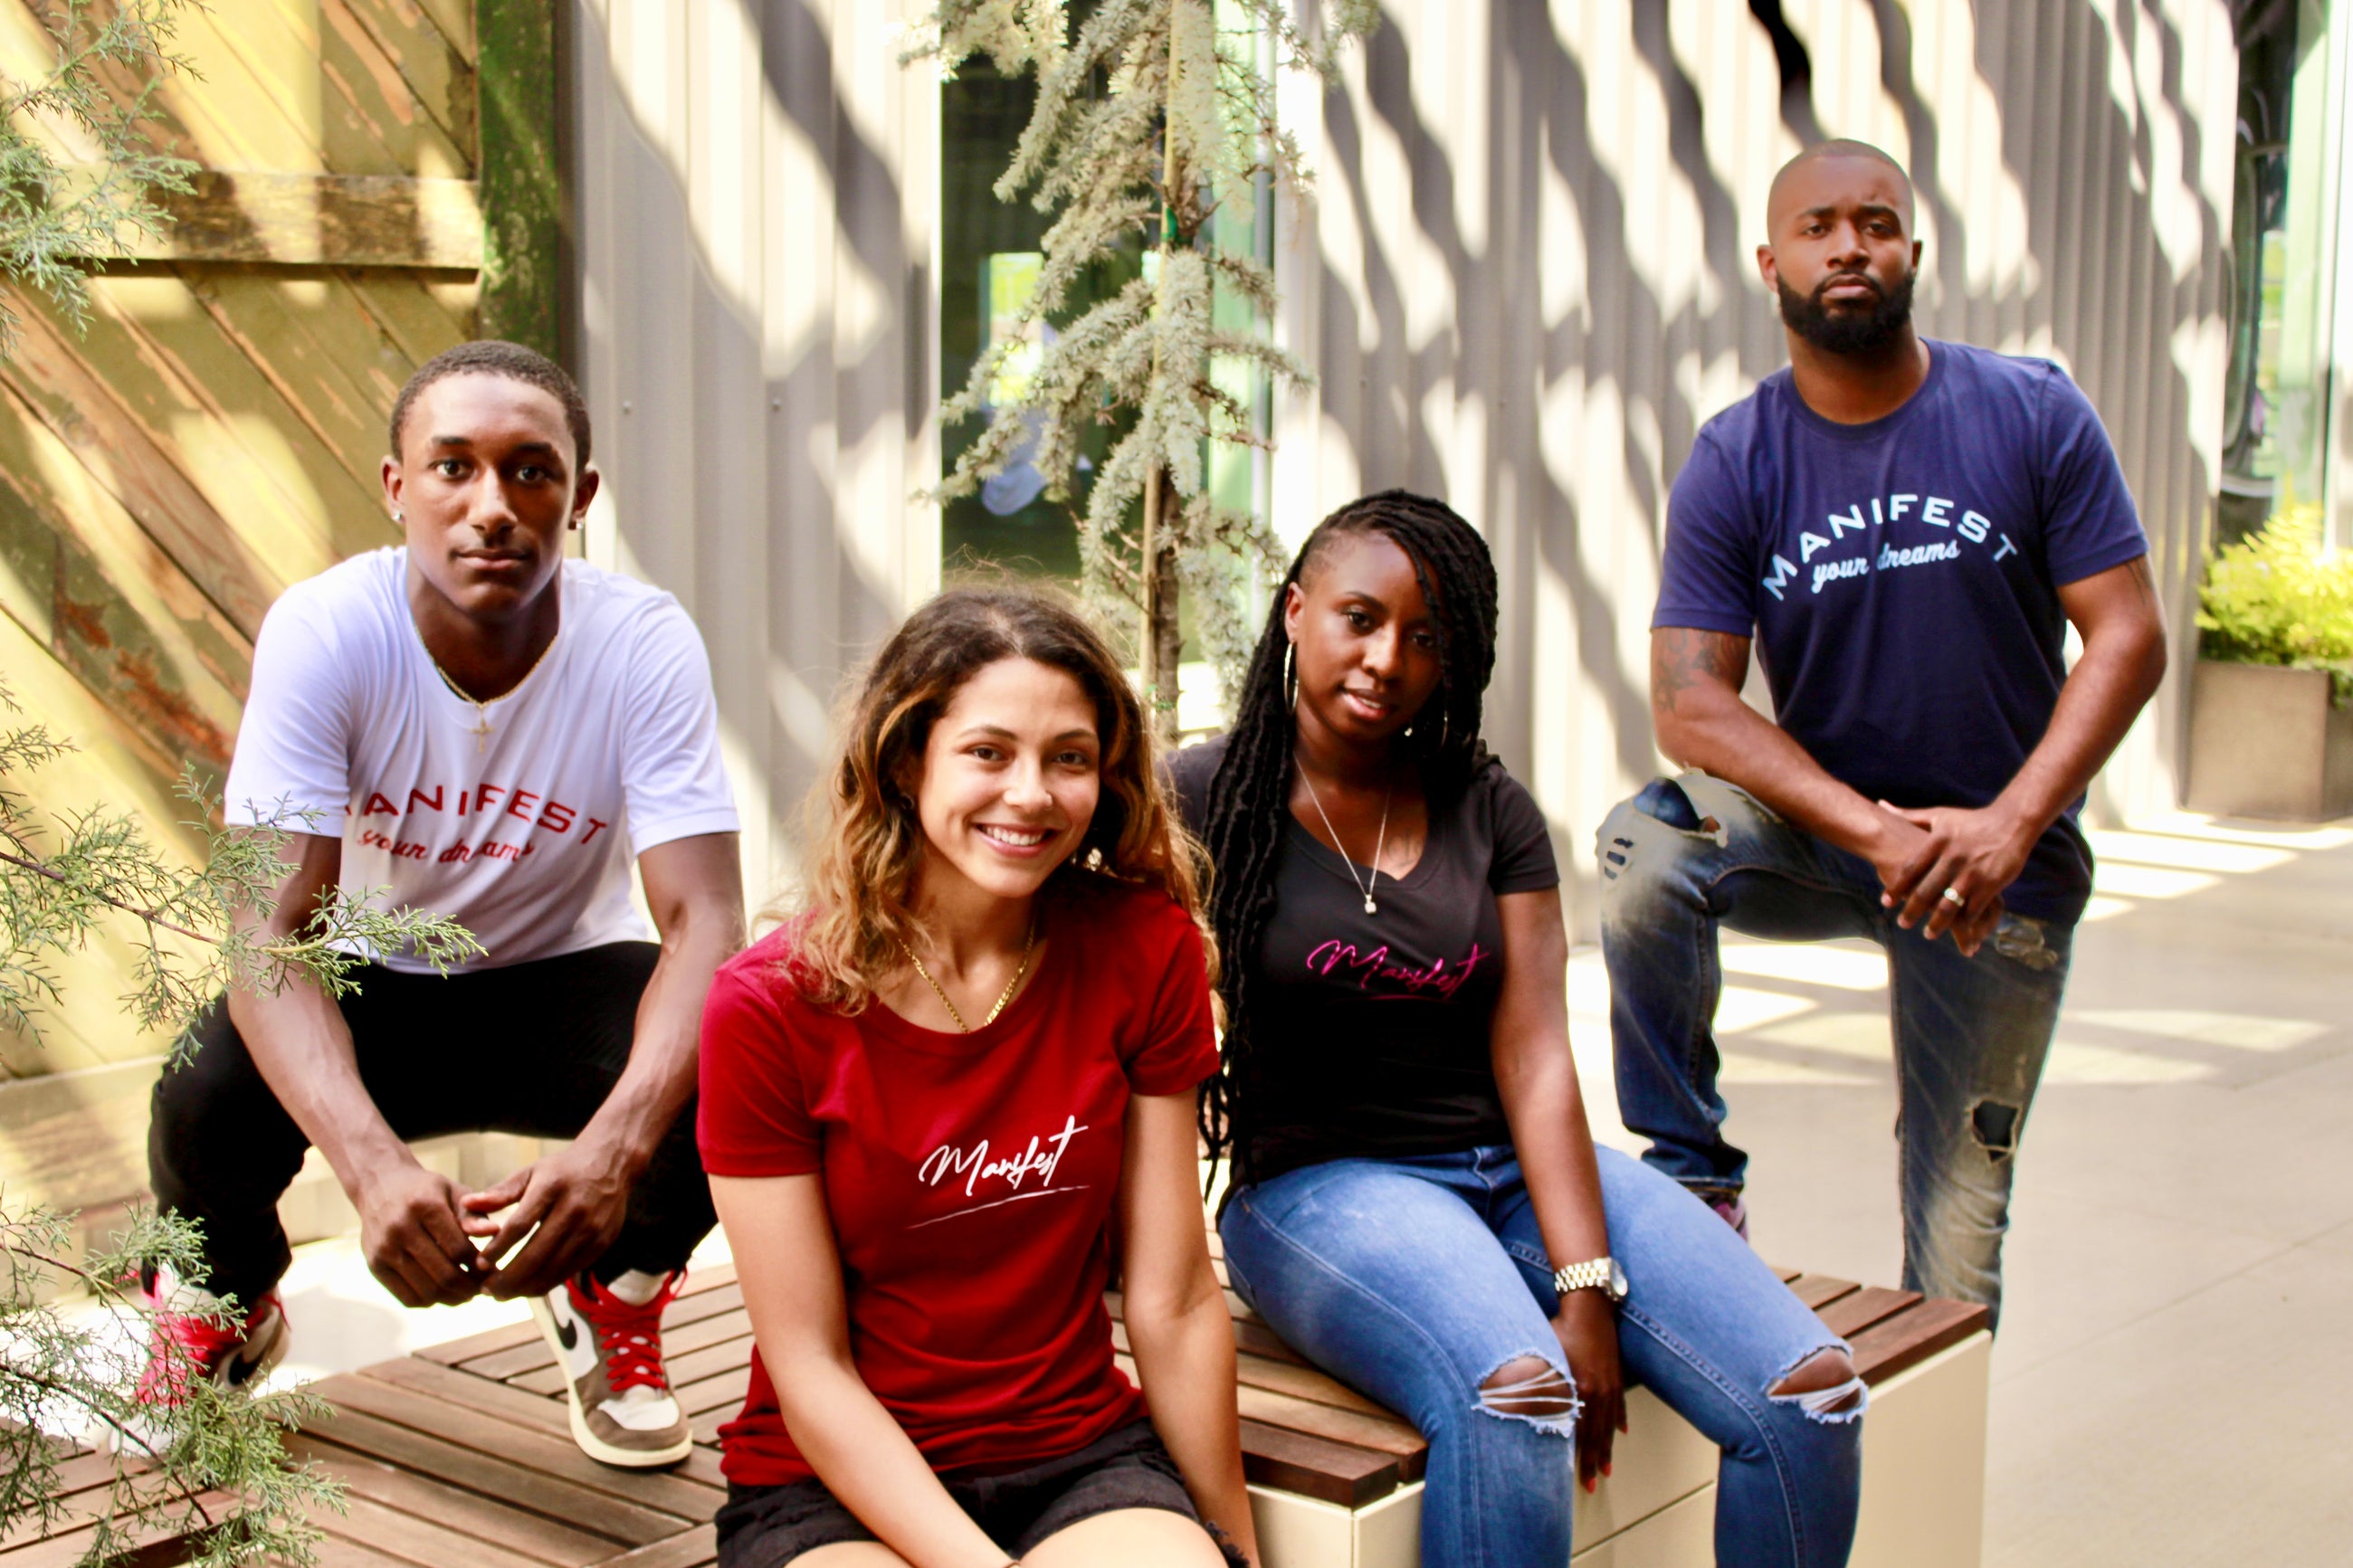 Manifest Your Dreams Apparel Products -ALL